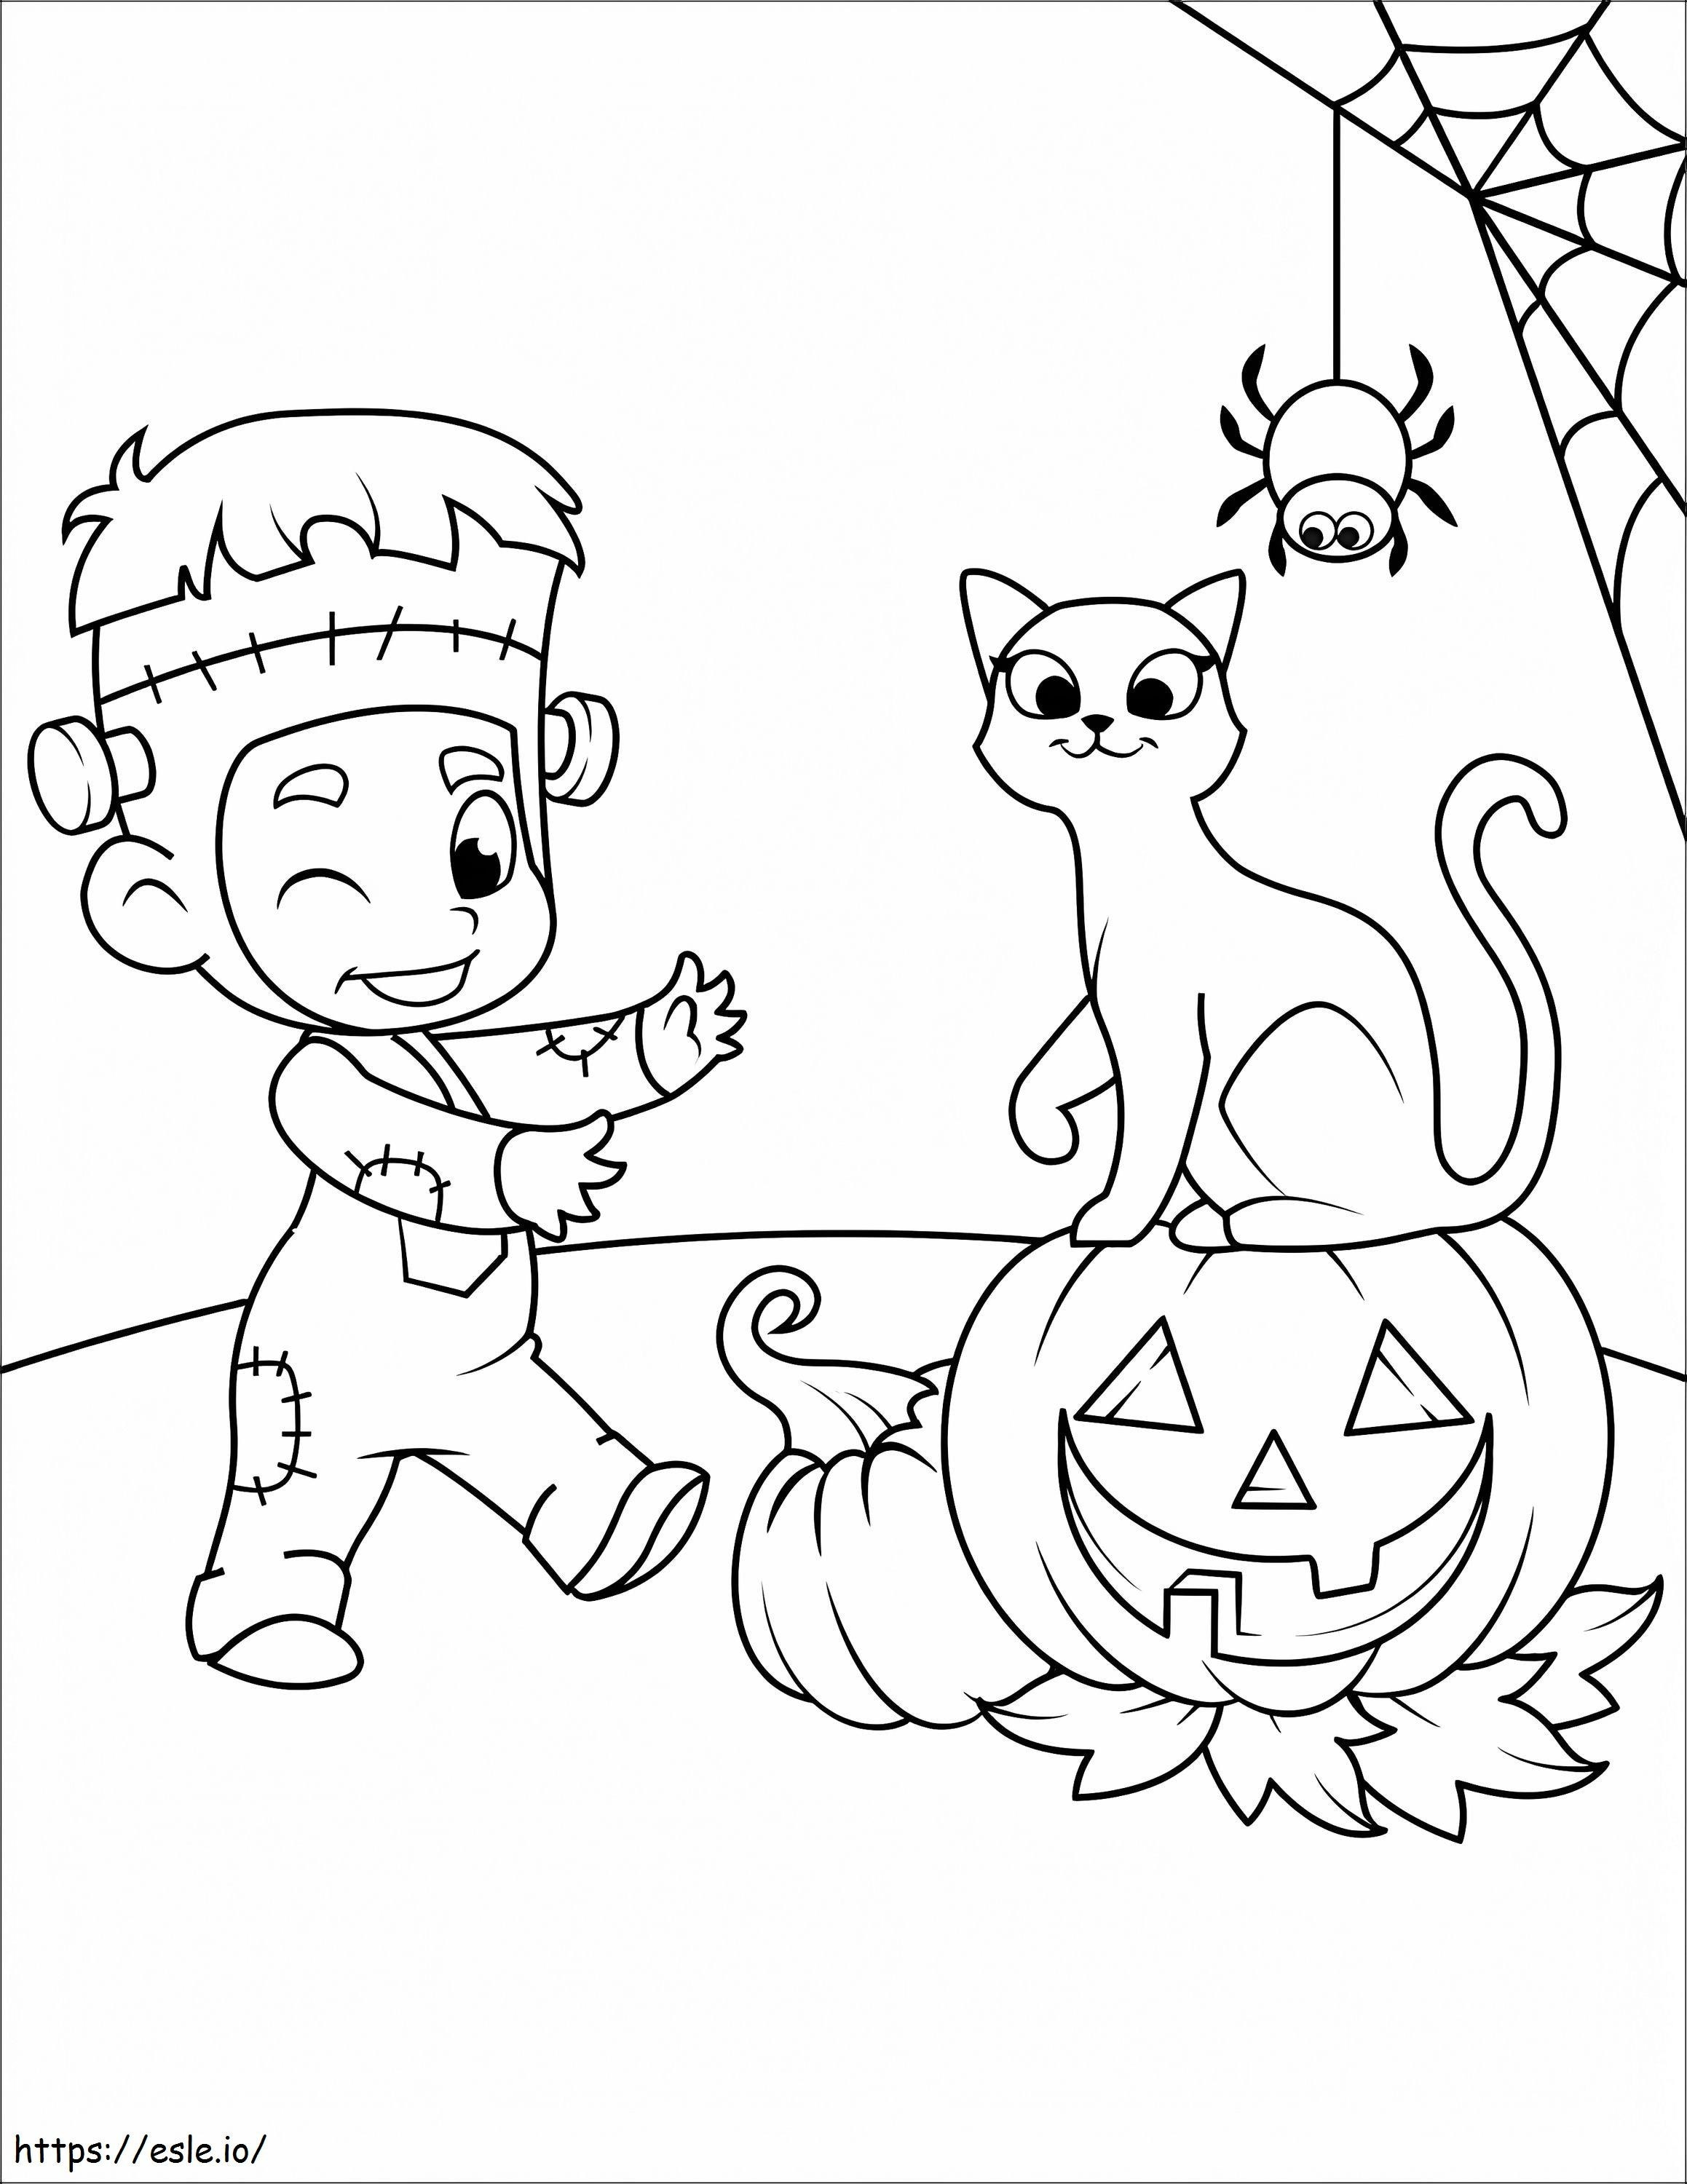 Cute Frankenstein Boy coloring page